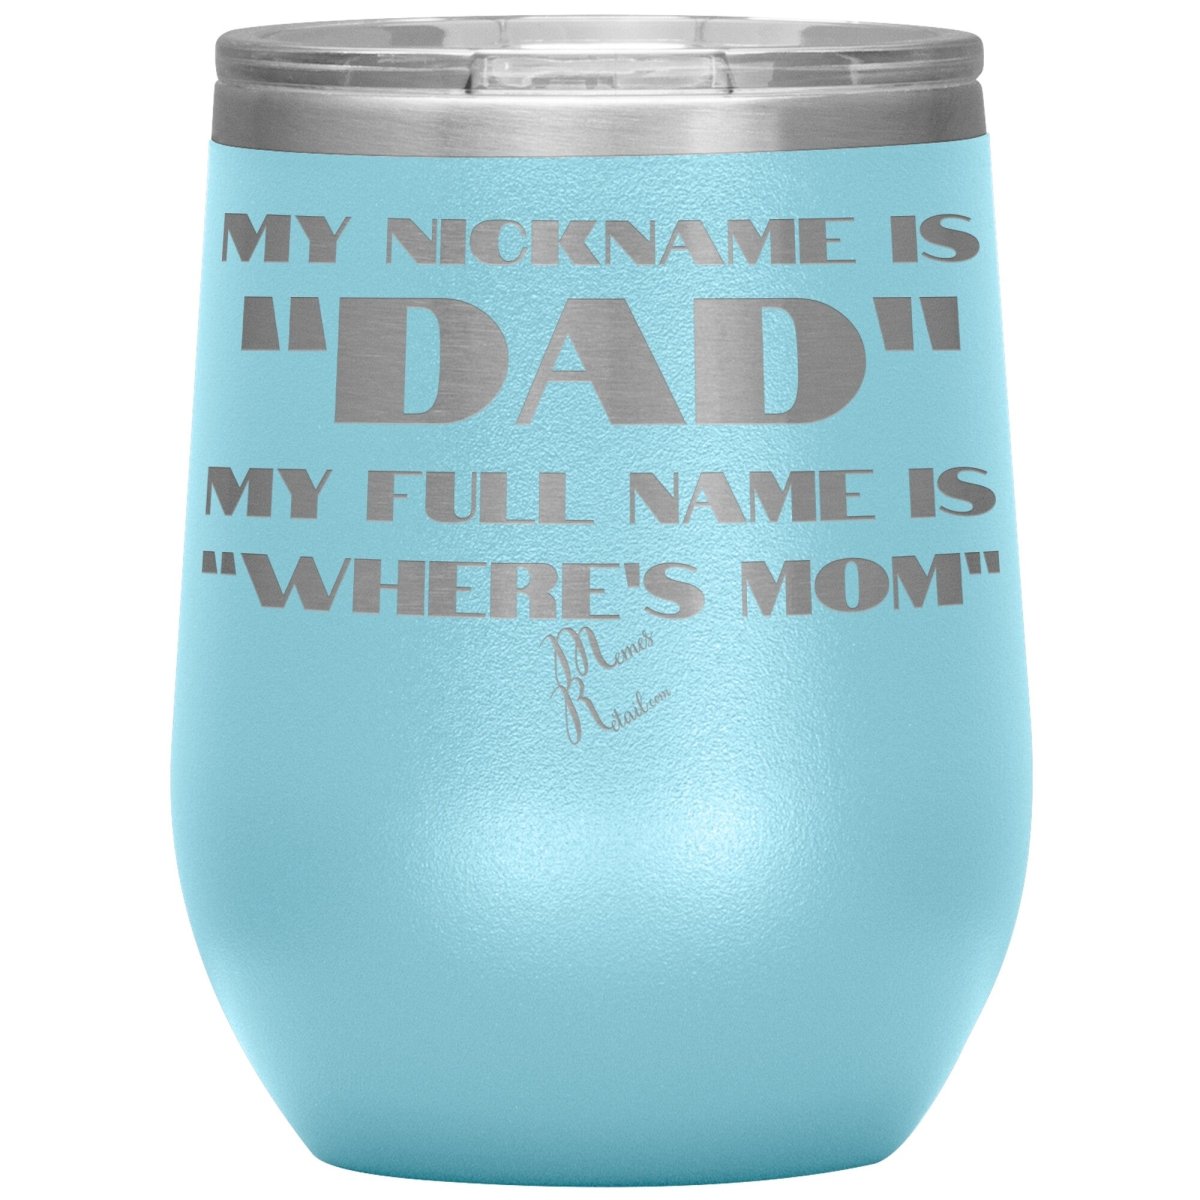 My Nickname is "Dad", My Full Name is "Where's Mom" Tumblers, 12oz Wine Insulated Tumbler / Light Blue - MemesRetail.com